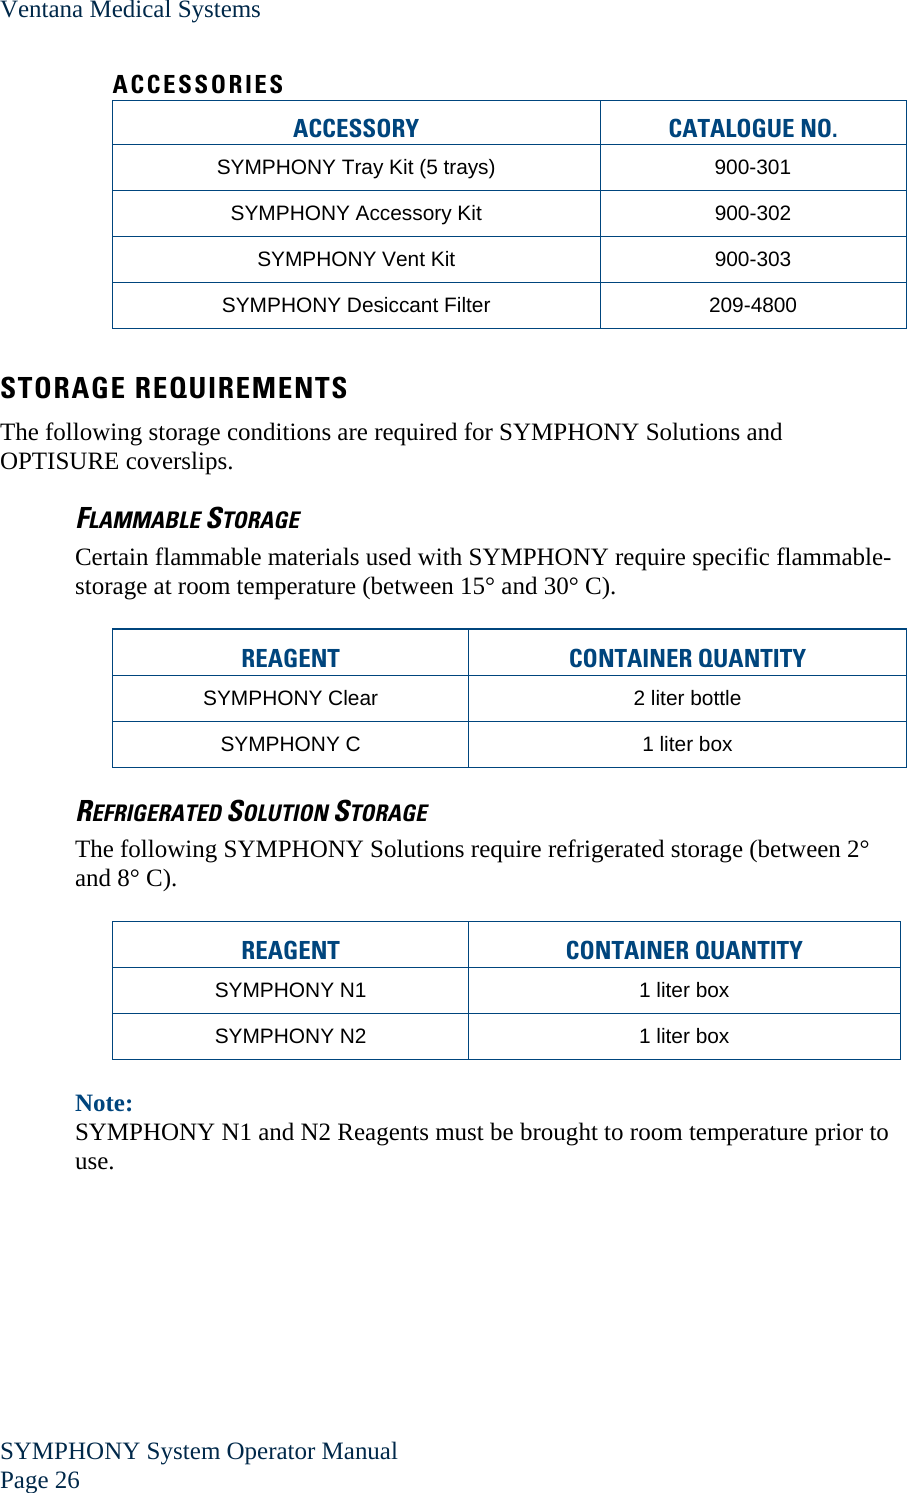 Ventana Medical Systems SYMPHONY System Operator Manual Page 26    ACCESSORIES ACCESSORY CATALOGUE NO. SYMPHONY Tray Kit (5 trays)  900-301 SYMPHONY Accessory Kit  900-302 SYMPHONY Vent Kit  900-303 SYMPHONY Desiccant Filter  209-4800  STORAGE REQUIREMENTS The following storage conditions are required for SYMPHONY Solutions and OPTISURE coverslips. FLAMMABLE STORAGE Certain flammable materials used with SYMPHONY require specific flammable-storage at room temperature (between 15° and 30° C).  REAGENT CONTAINER QUANTITY  SYMPHONY Clear  2 liter bottle SYMPHONY C  1 liter box REFRIGERATED SOLUTION STORAGE The following SYMPHONY Solutions require refrigerated storage (between 2° and 8° C).  REAGENT CONTAINER QUANTITY  SYMPHONY N1  1 liter box SYMPHONY N2  1 liter box  Note:  SYMPHONY N1 and N2 Reagents must be brought to room temperature prior to use. 